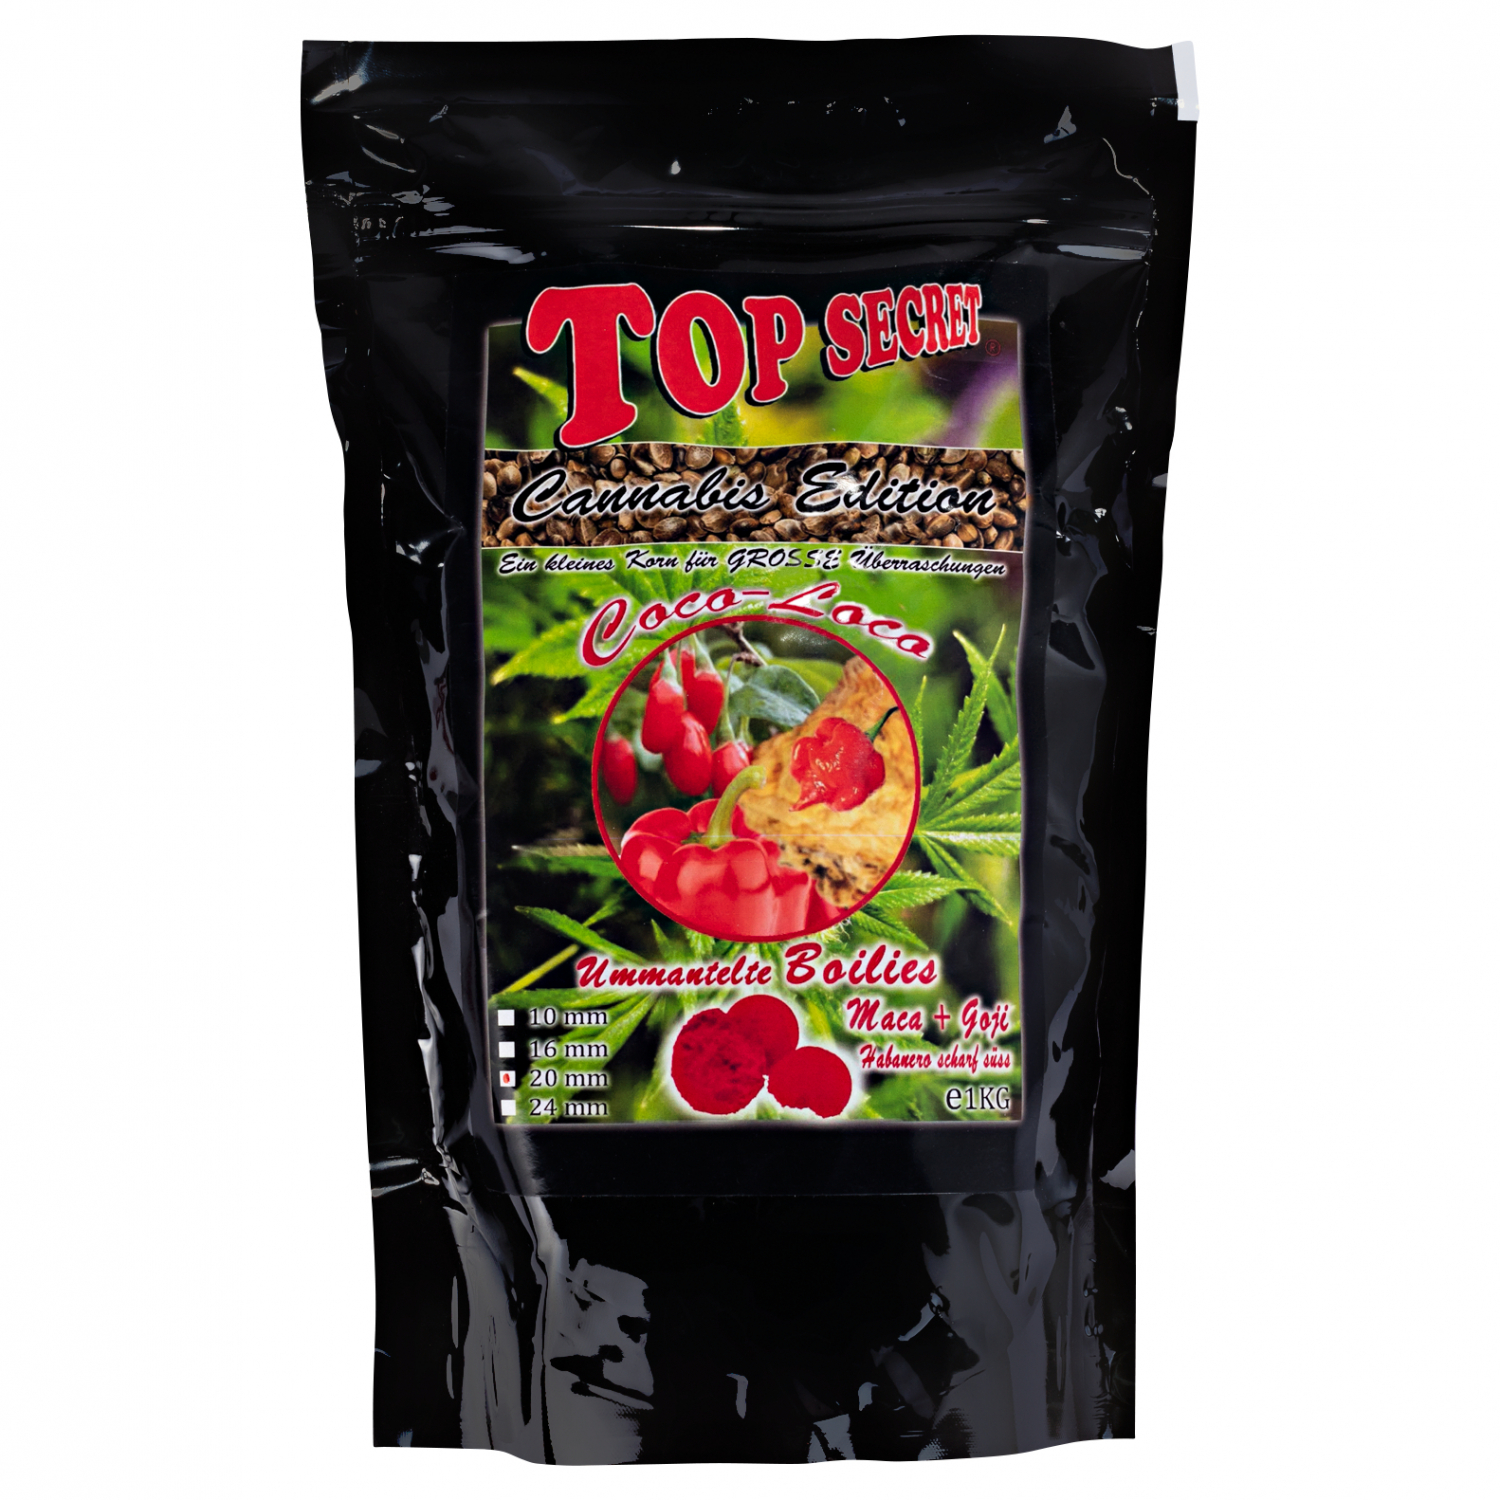 Top Secret Boilies Cannabis Coco-Loco (Pineapple Passion Fruit, yellow) 